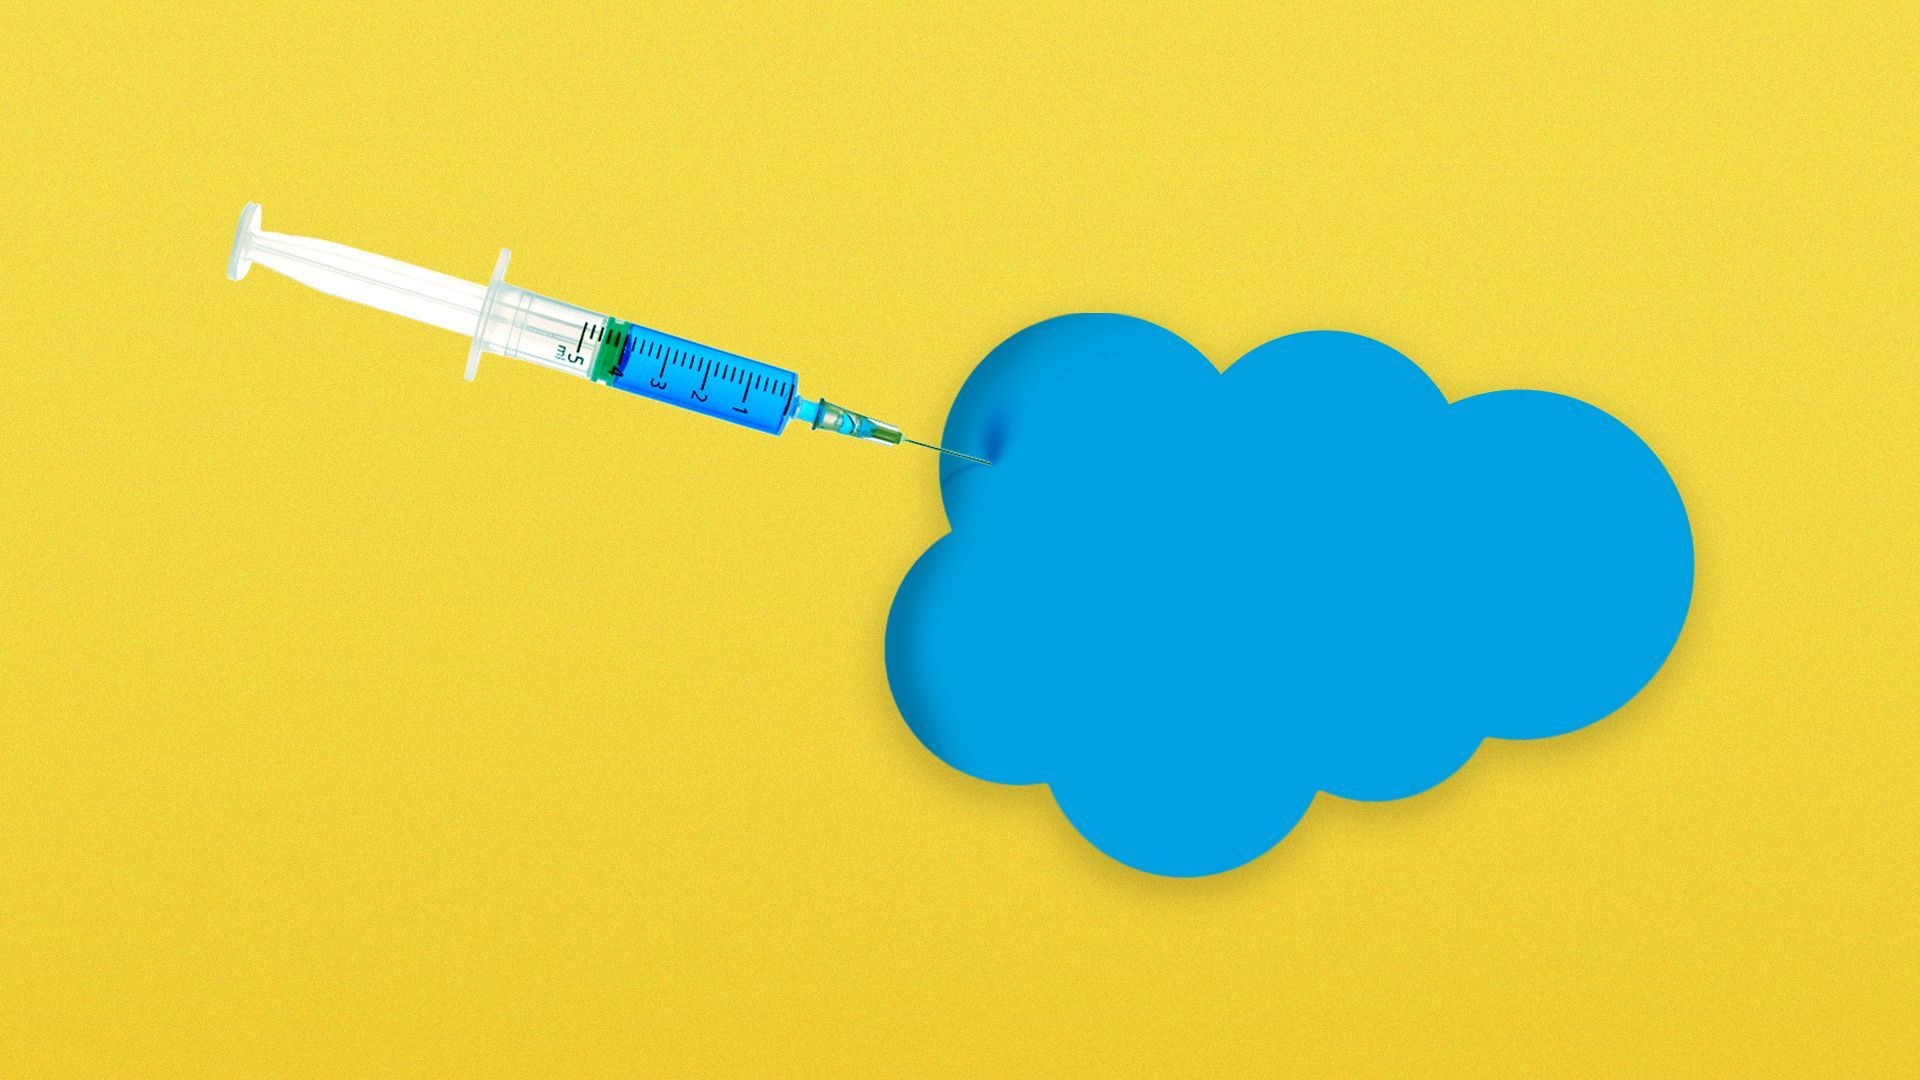 Illustration of a syringe going into the Salesforce logo.